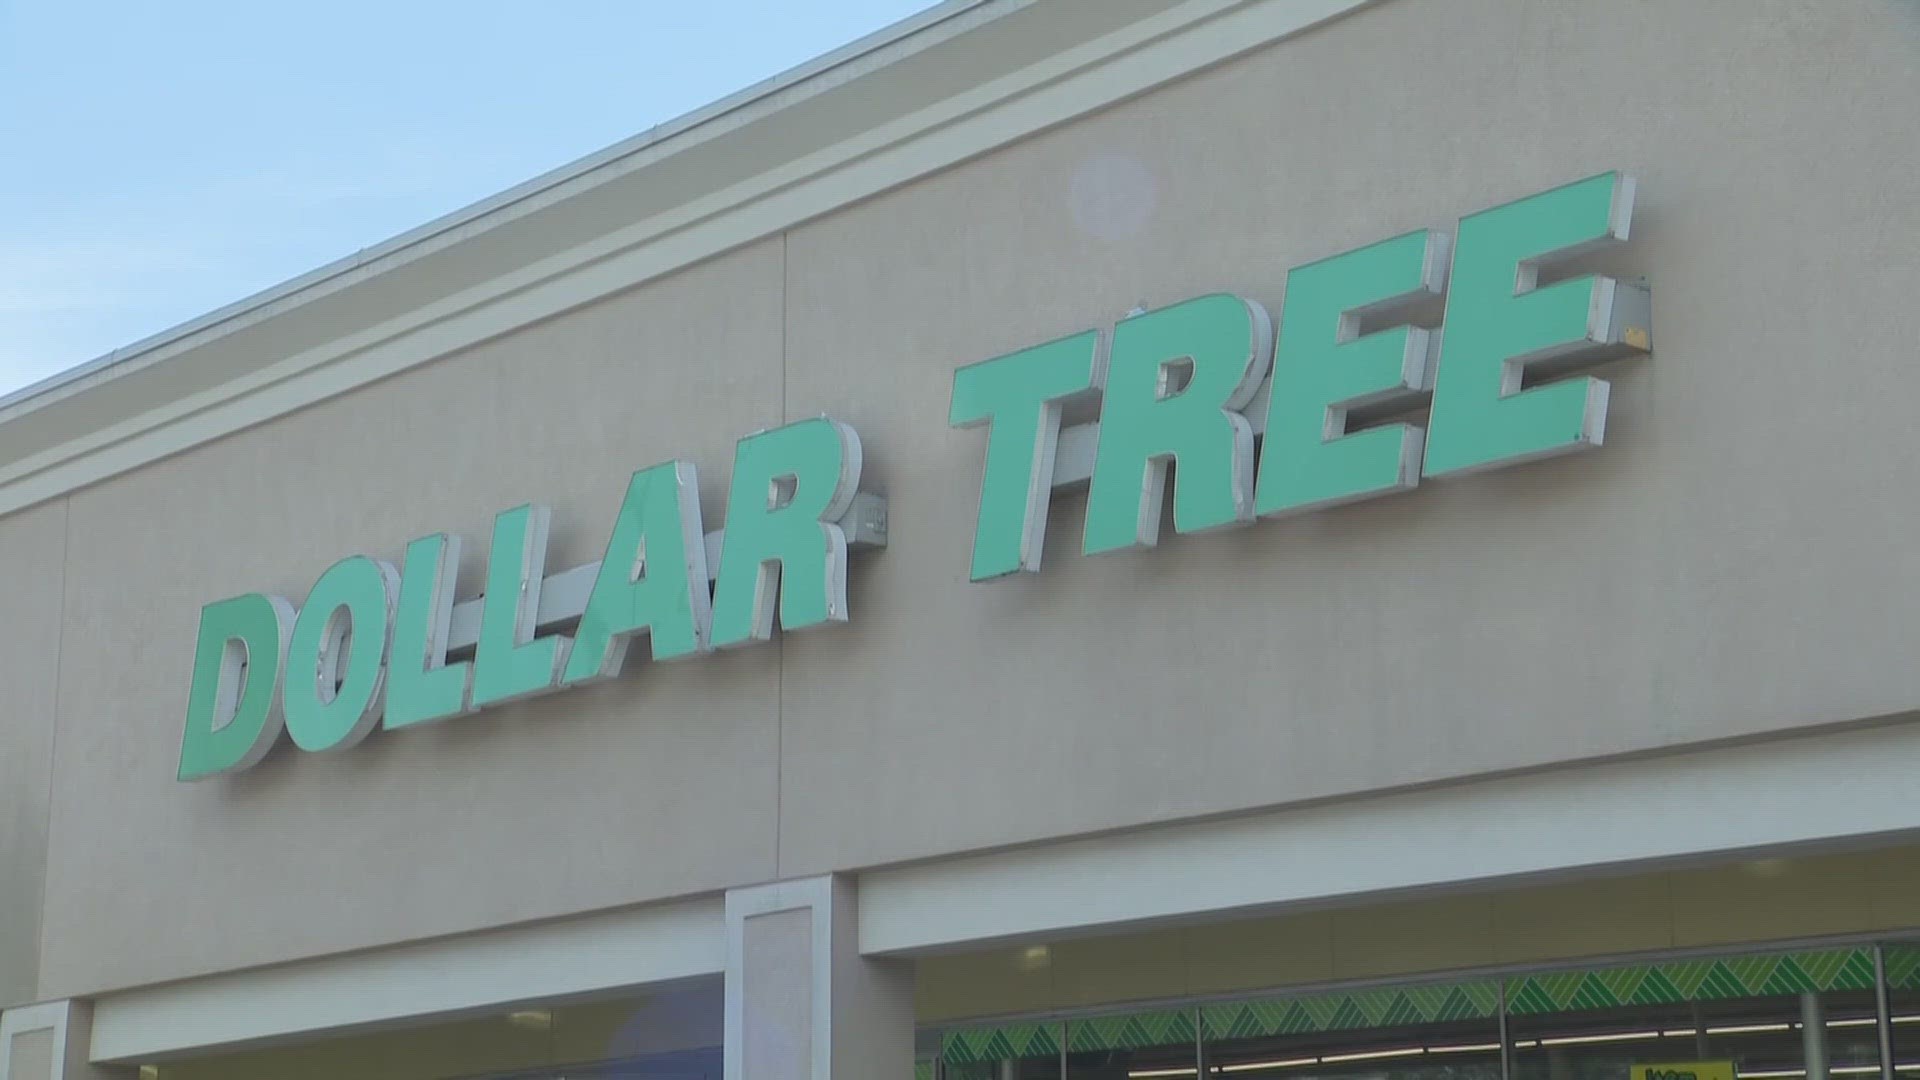 Dollar Tree acquired Family Dollar almost a decade ago after a bidding war with rival Dollar General, but it has had difficulty absorbing the chain.